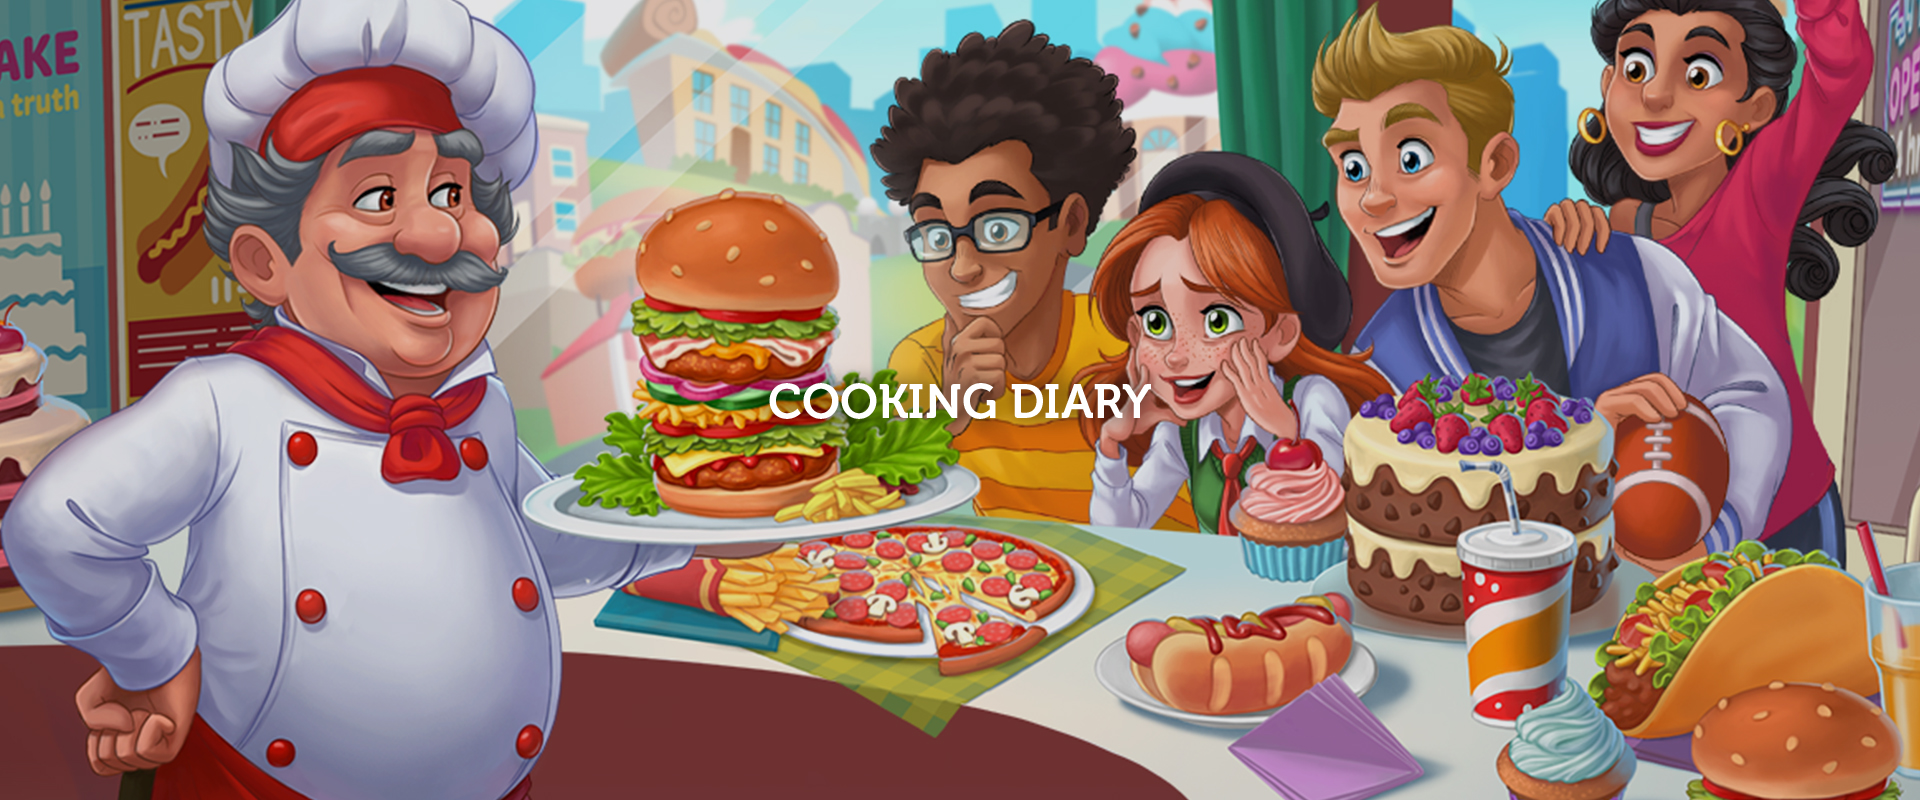 Cooking Diary App